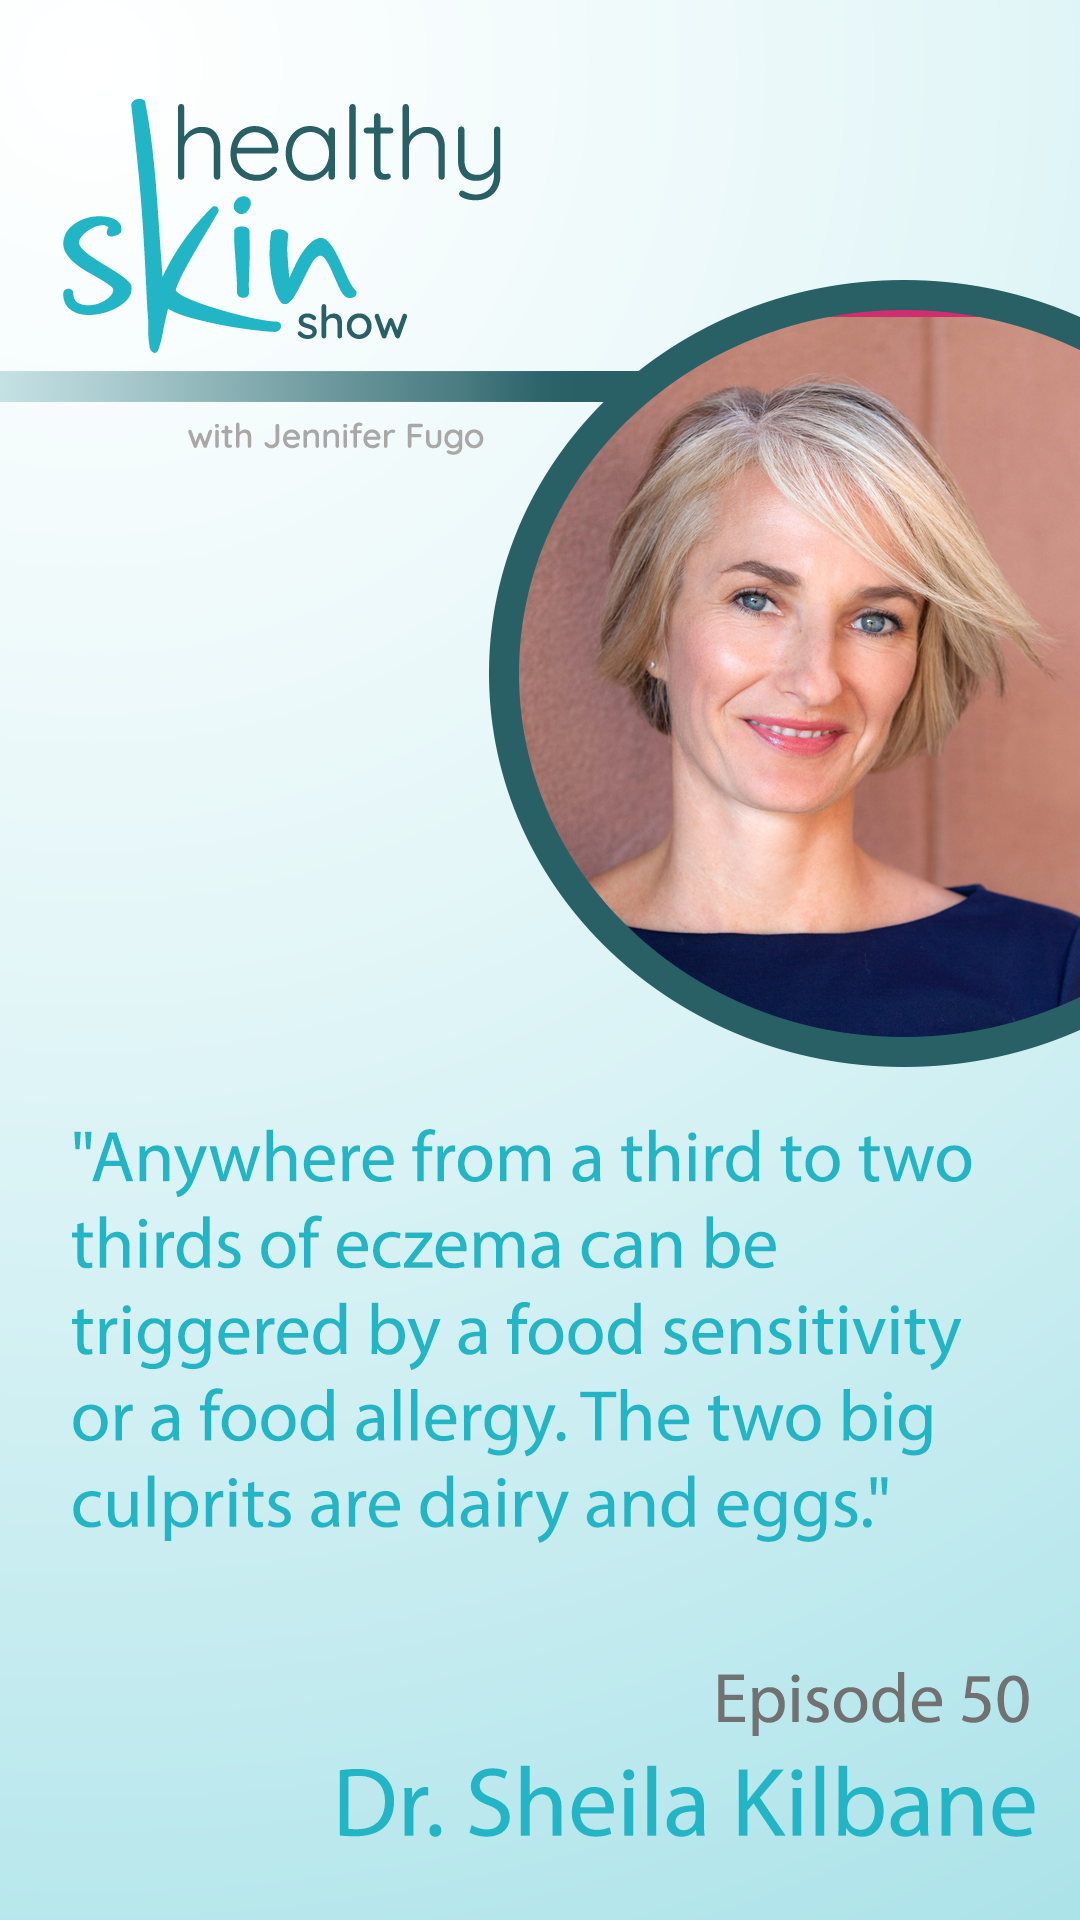 "Anywhere from a third to two thirds of eczema can be triggered by a food sensitivity or a food allergy. The two big culprits are dairy and eggs."